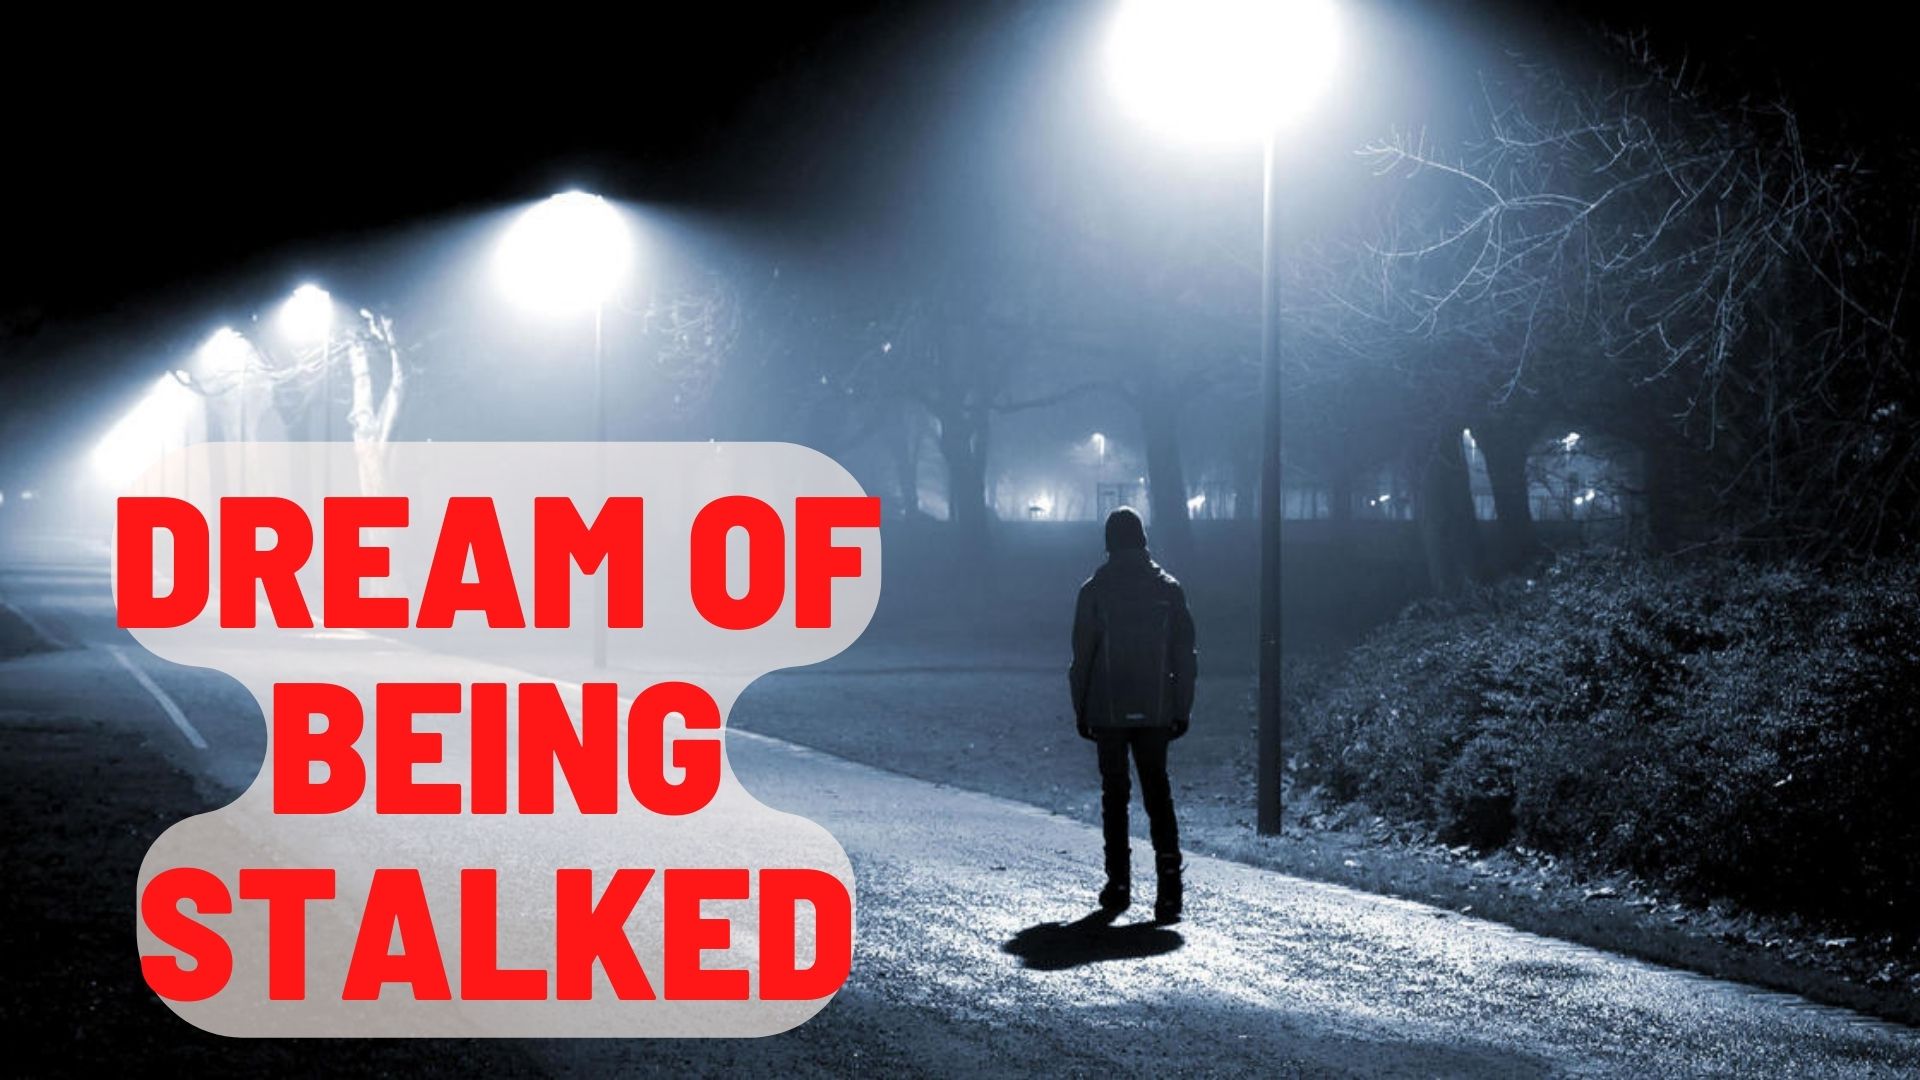 Dream Of Being Stalked - Represents Persisting Troubles